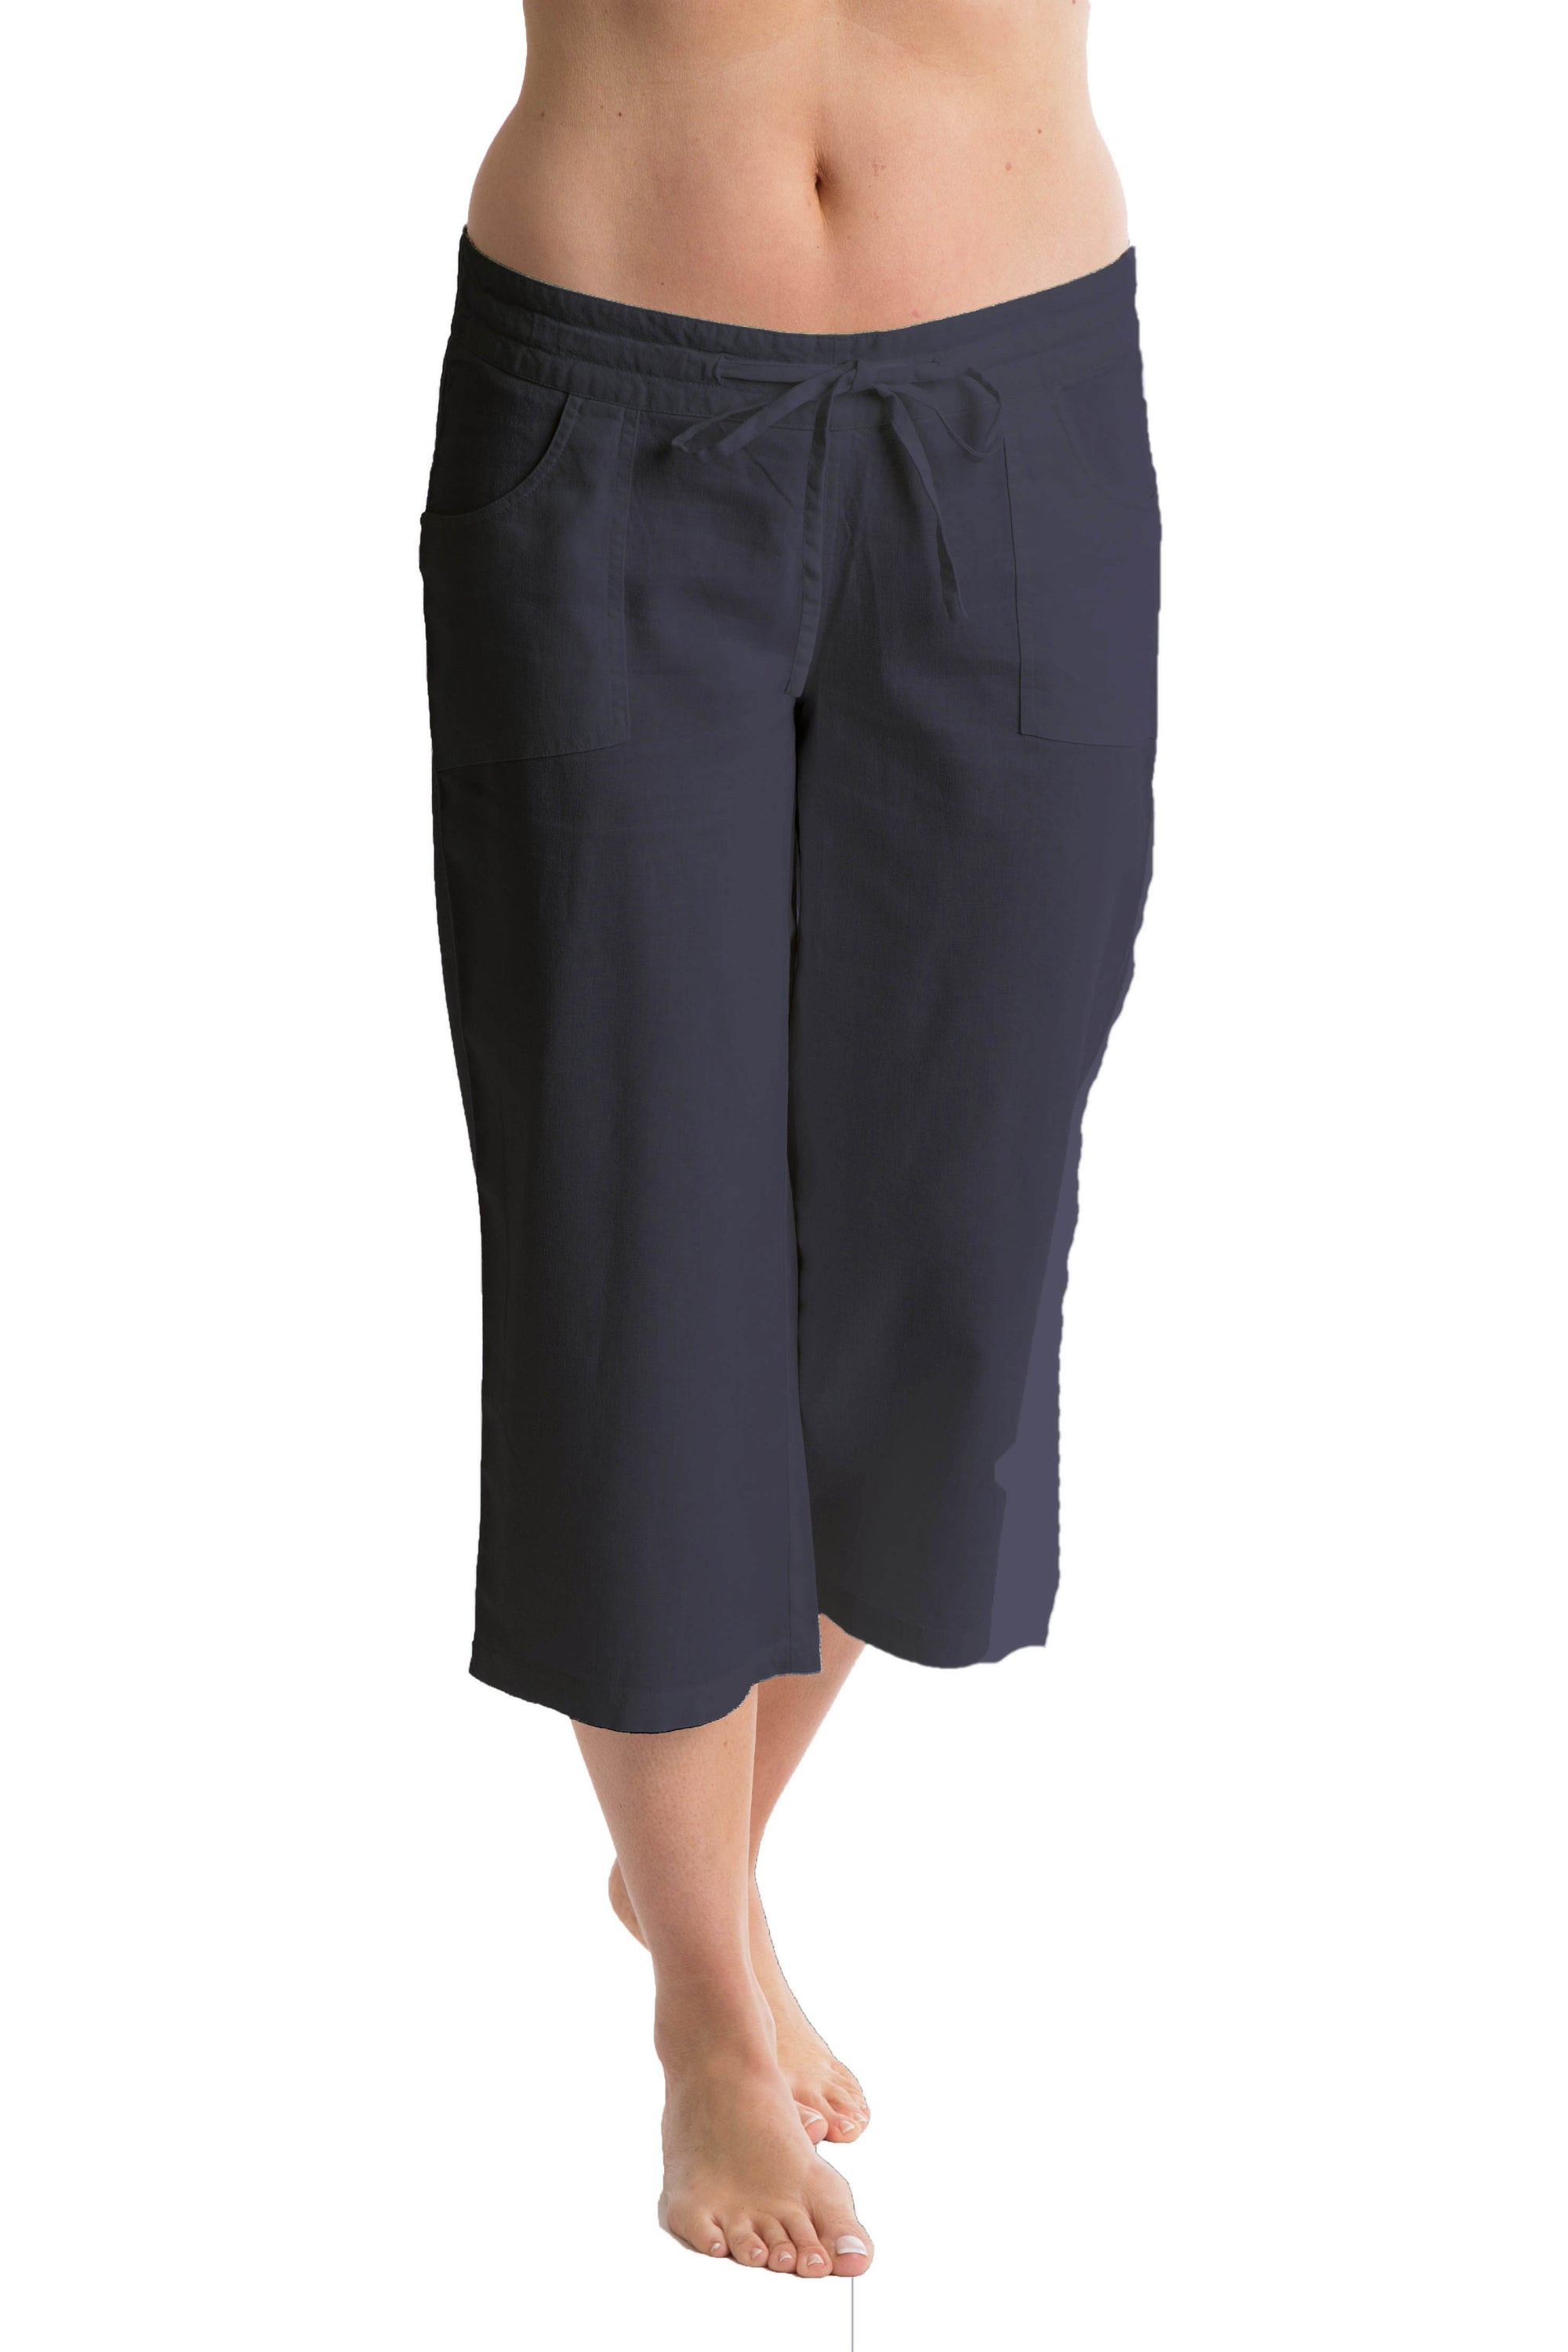 Octave Ladies Linen Cropped 3/4 (Three Quarter) Length Trousers ...